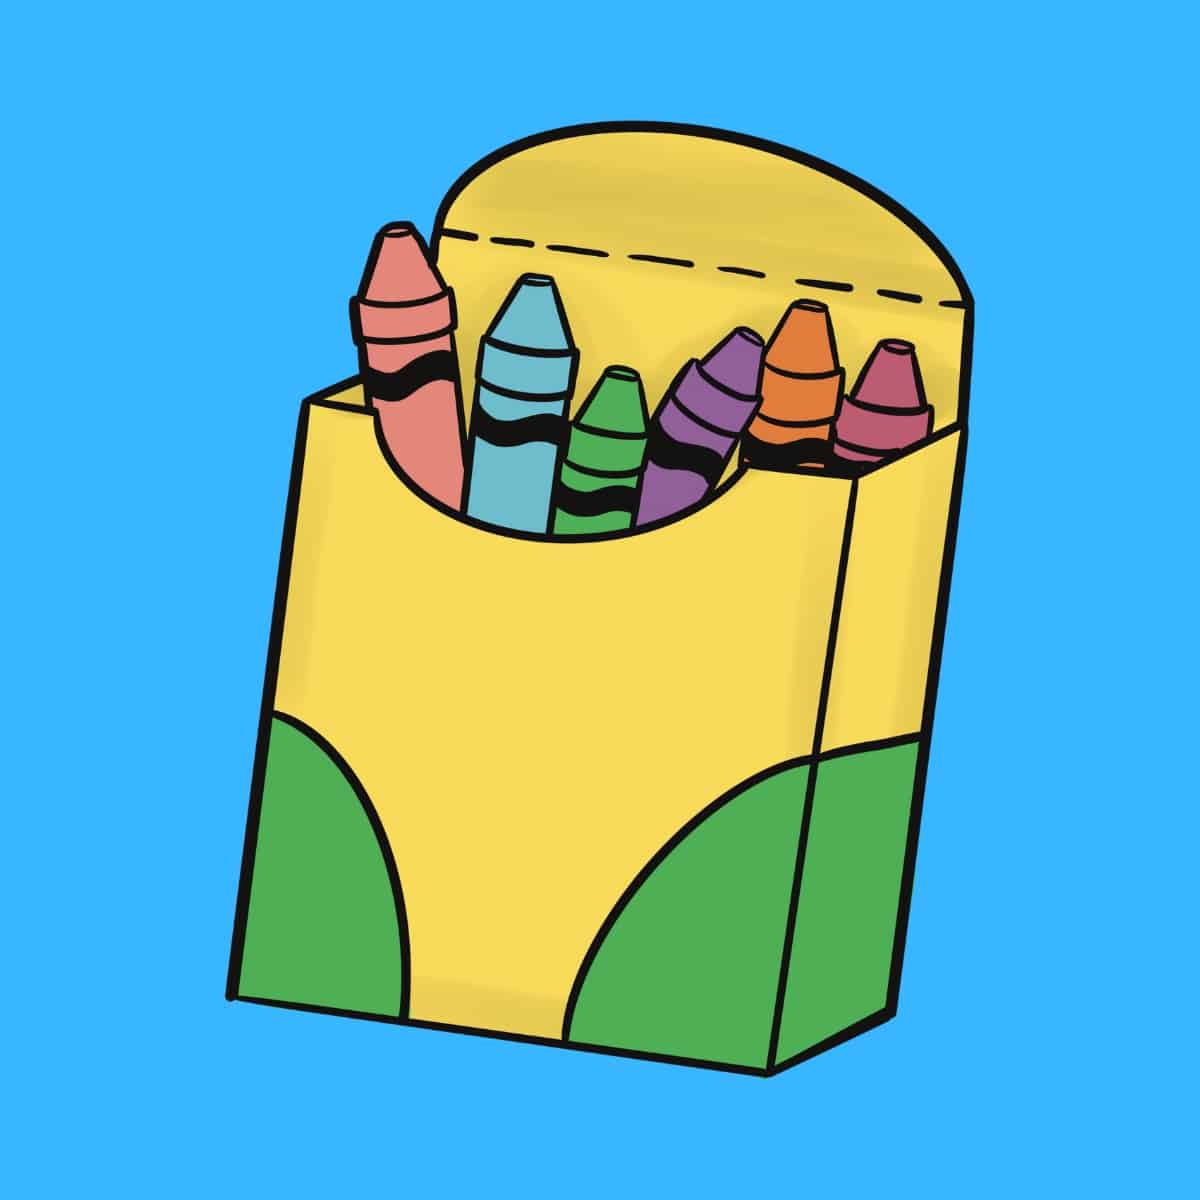 Cartoon graphic of a pack of crayons on a blue background.